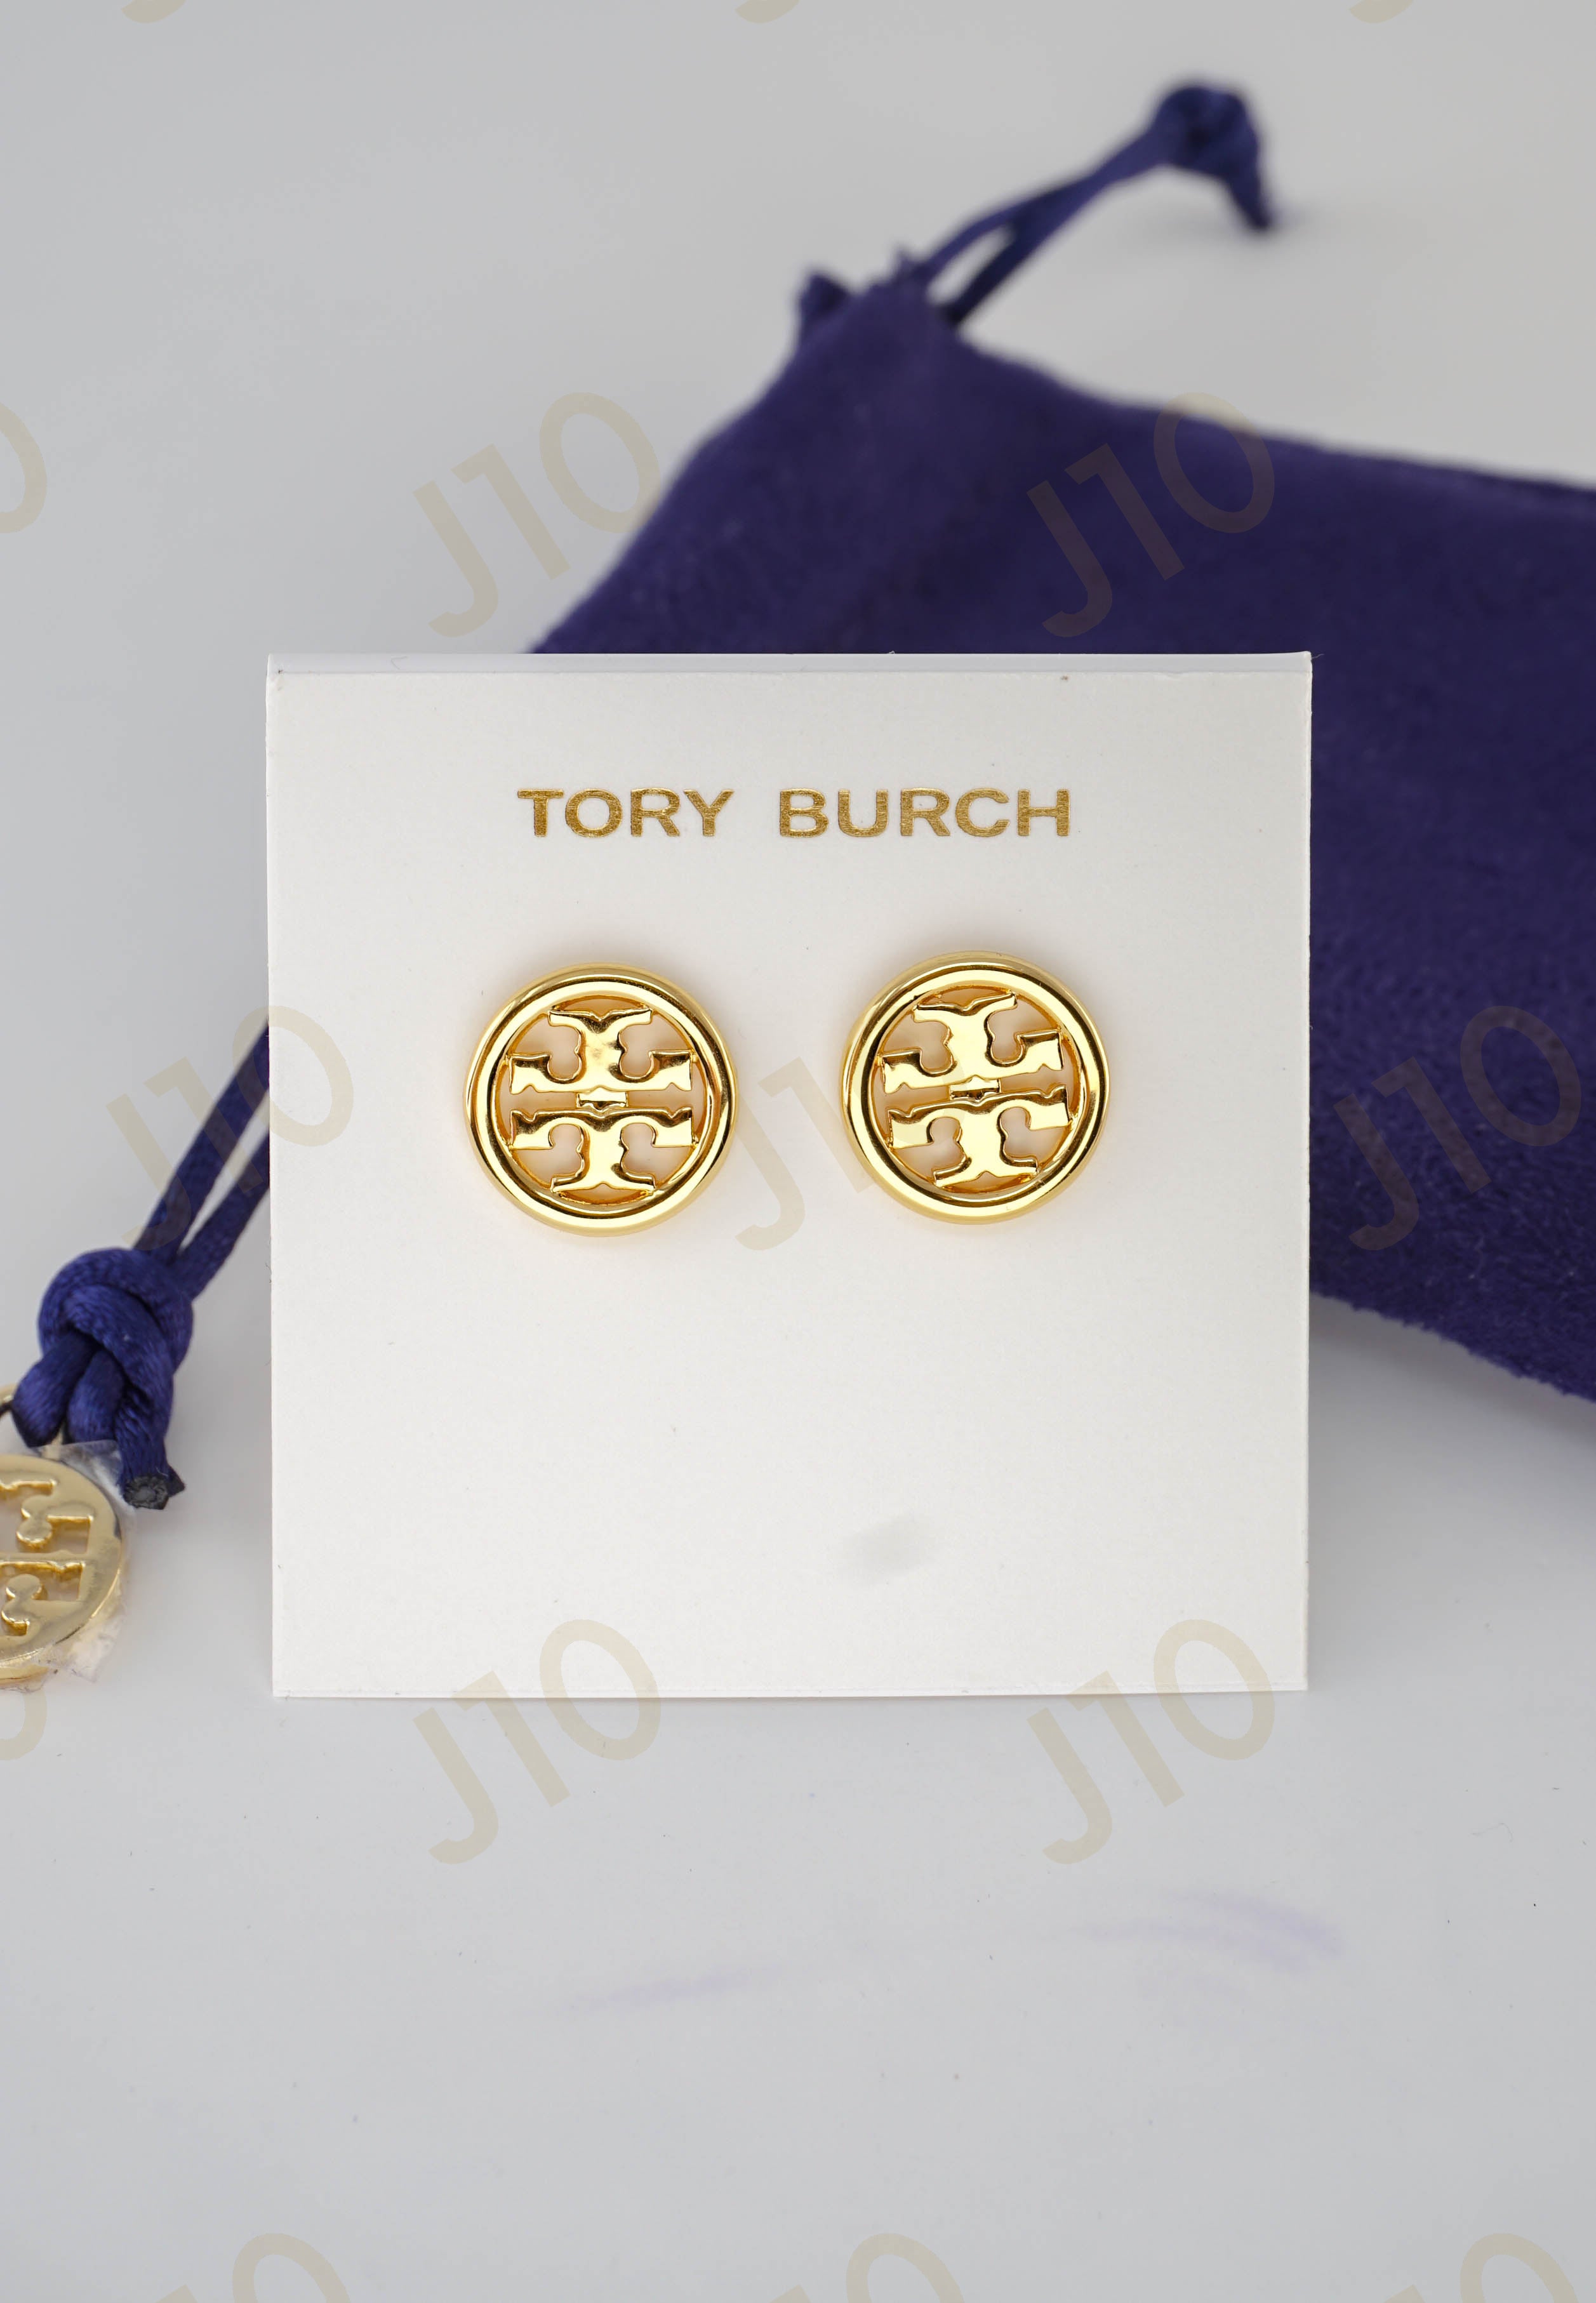 Tory Burch Large Miller Logo Large Stud Earrings in Tory Gold - Brand